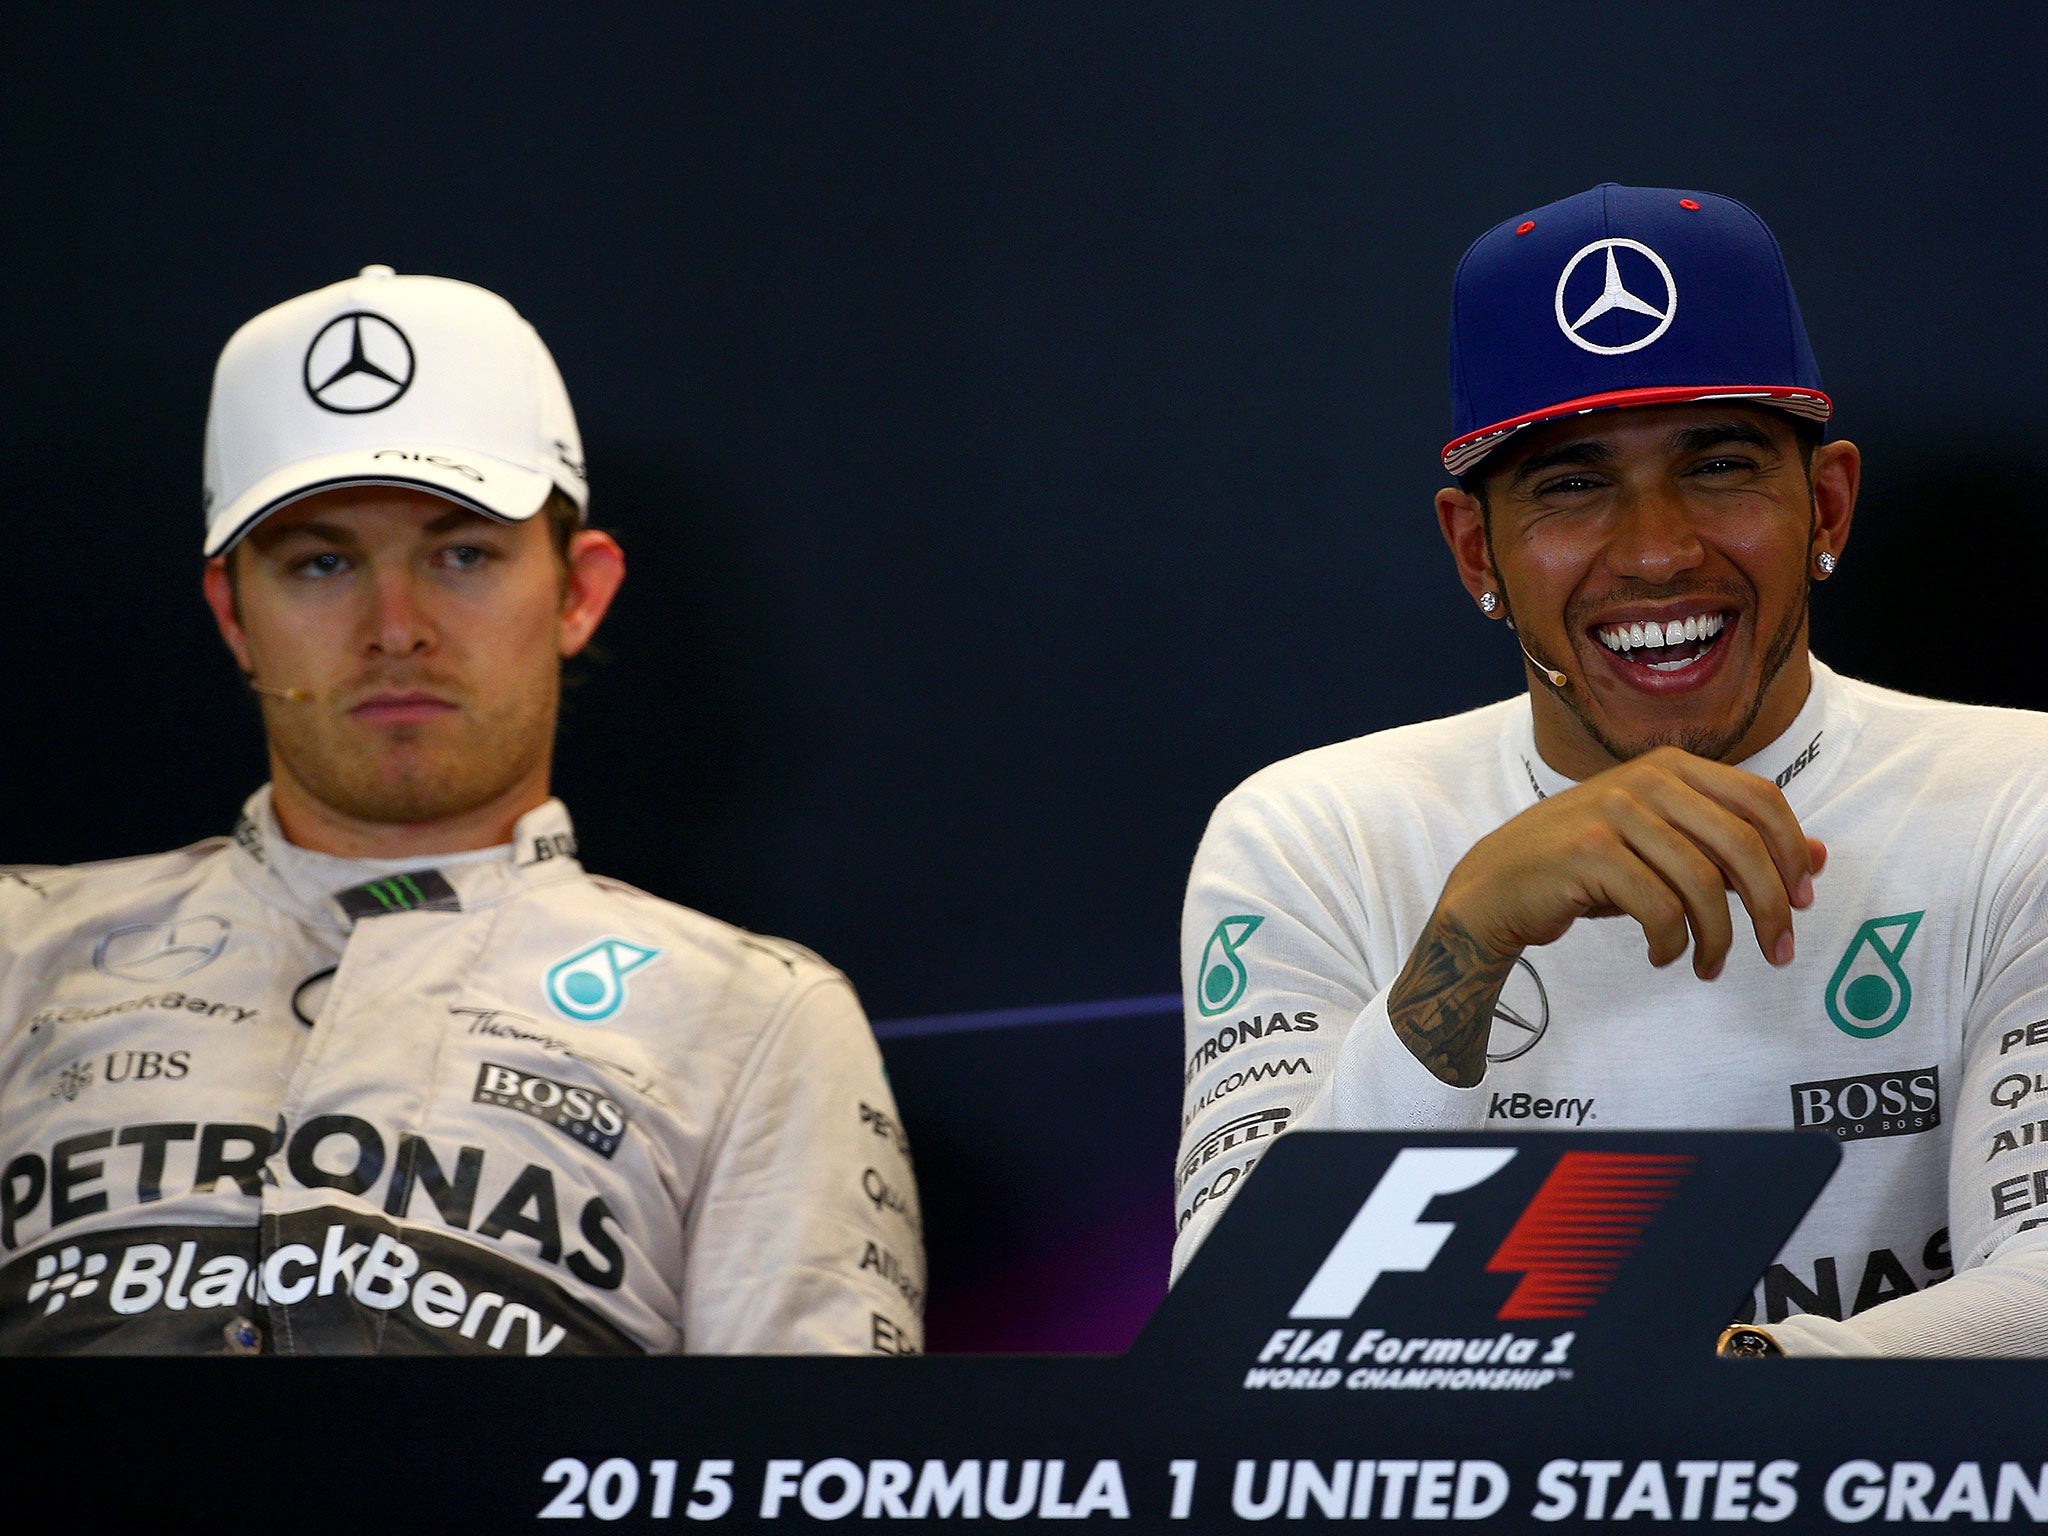 Lewis Hamilton and Nico Rosberg after the US Grand Prix